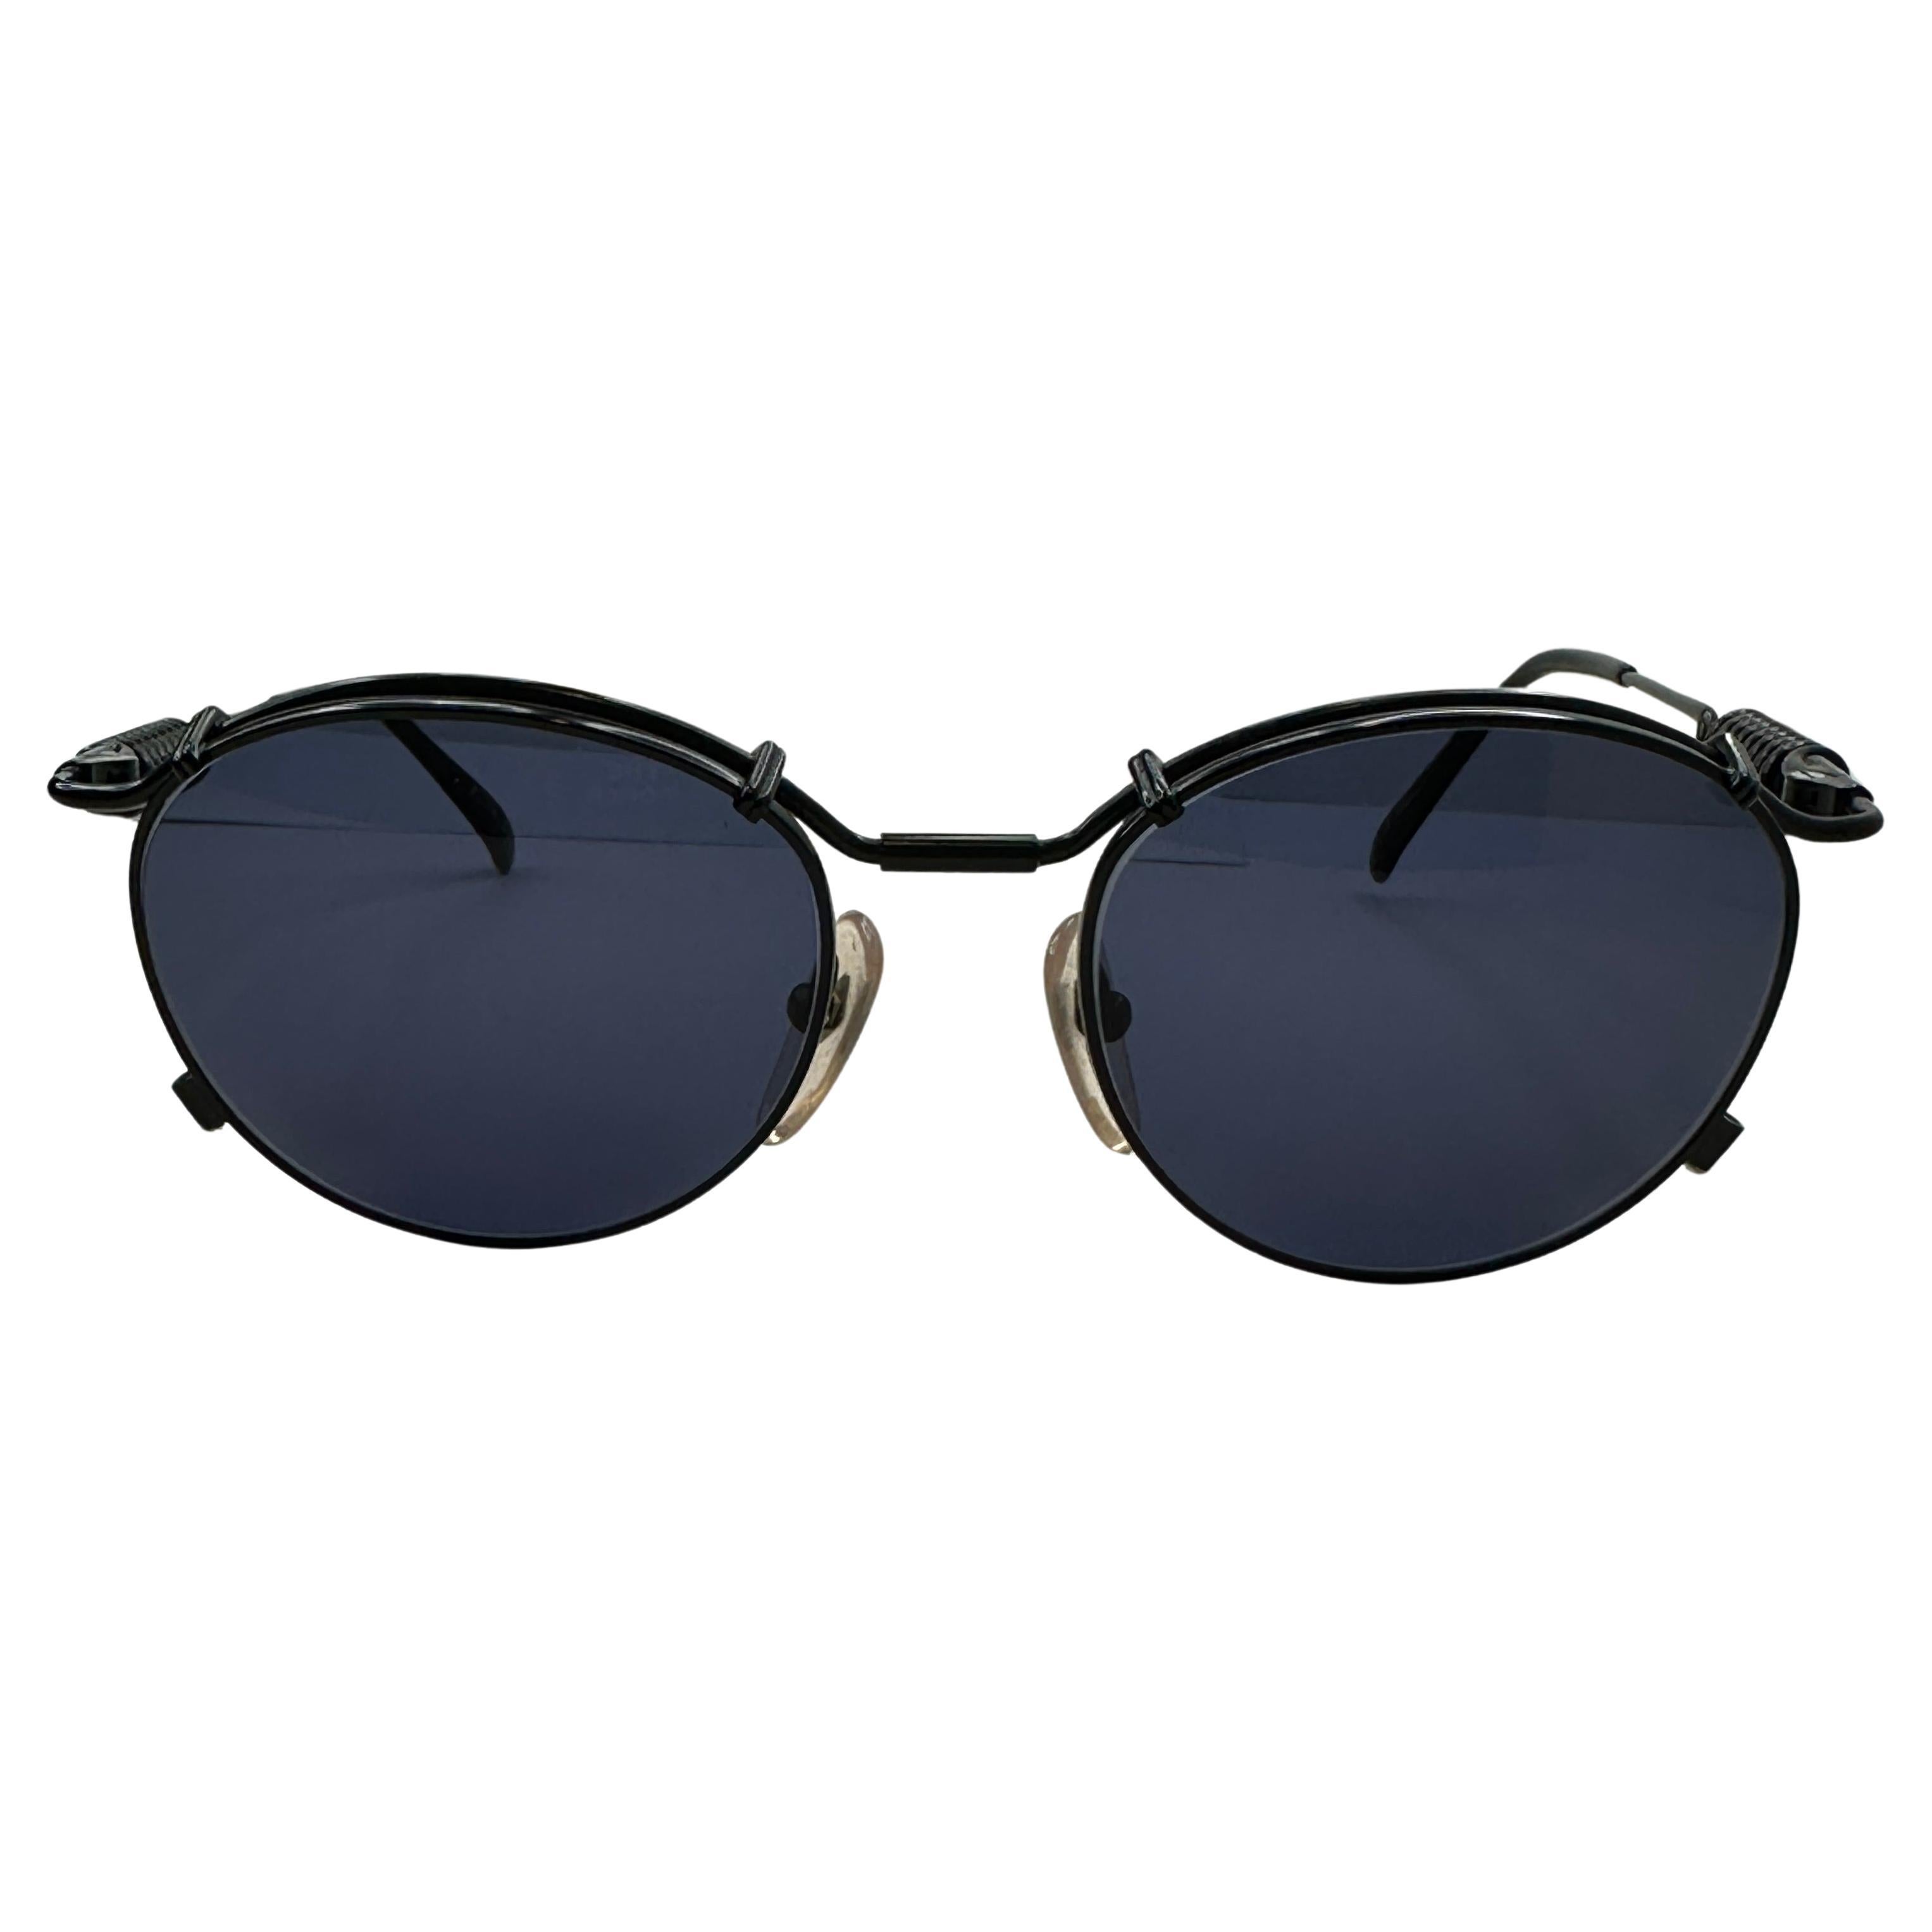 Iconic Jean Paul Gaultier Black Metal "Limited Edition" "Spring Coil" Sunglasses For Sale